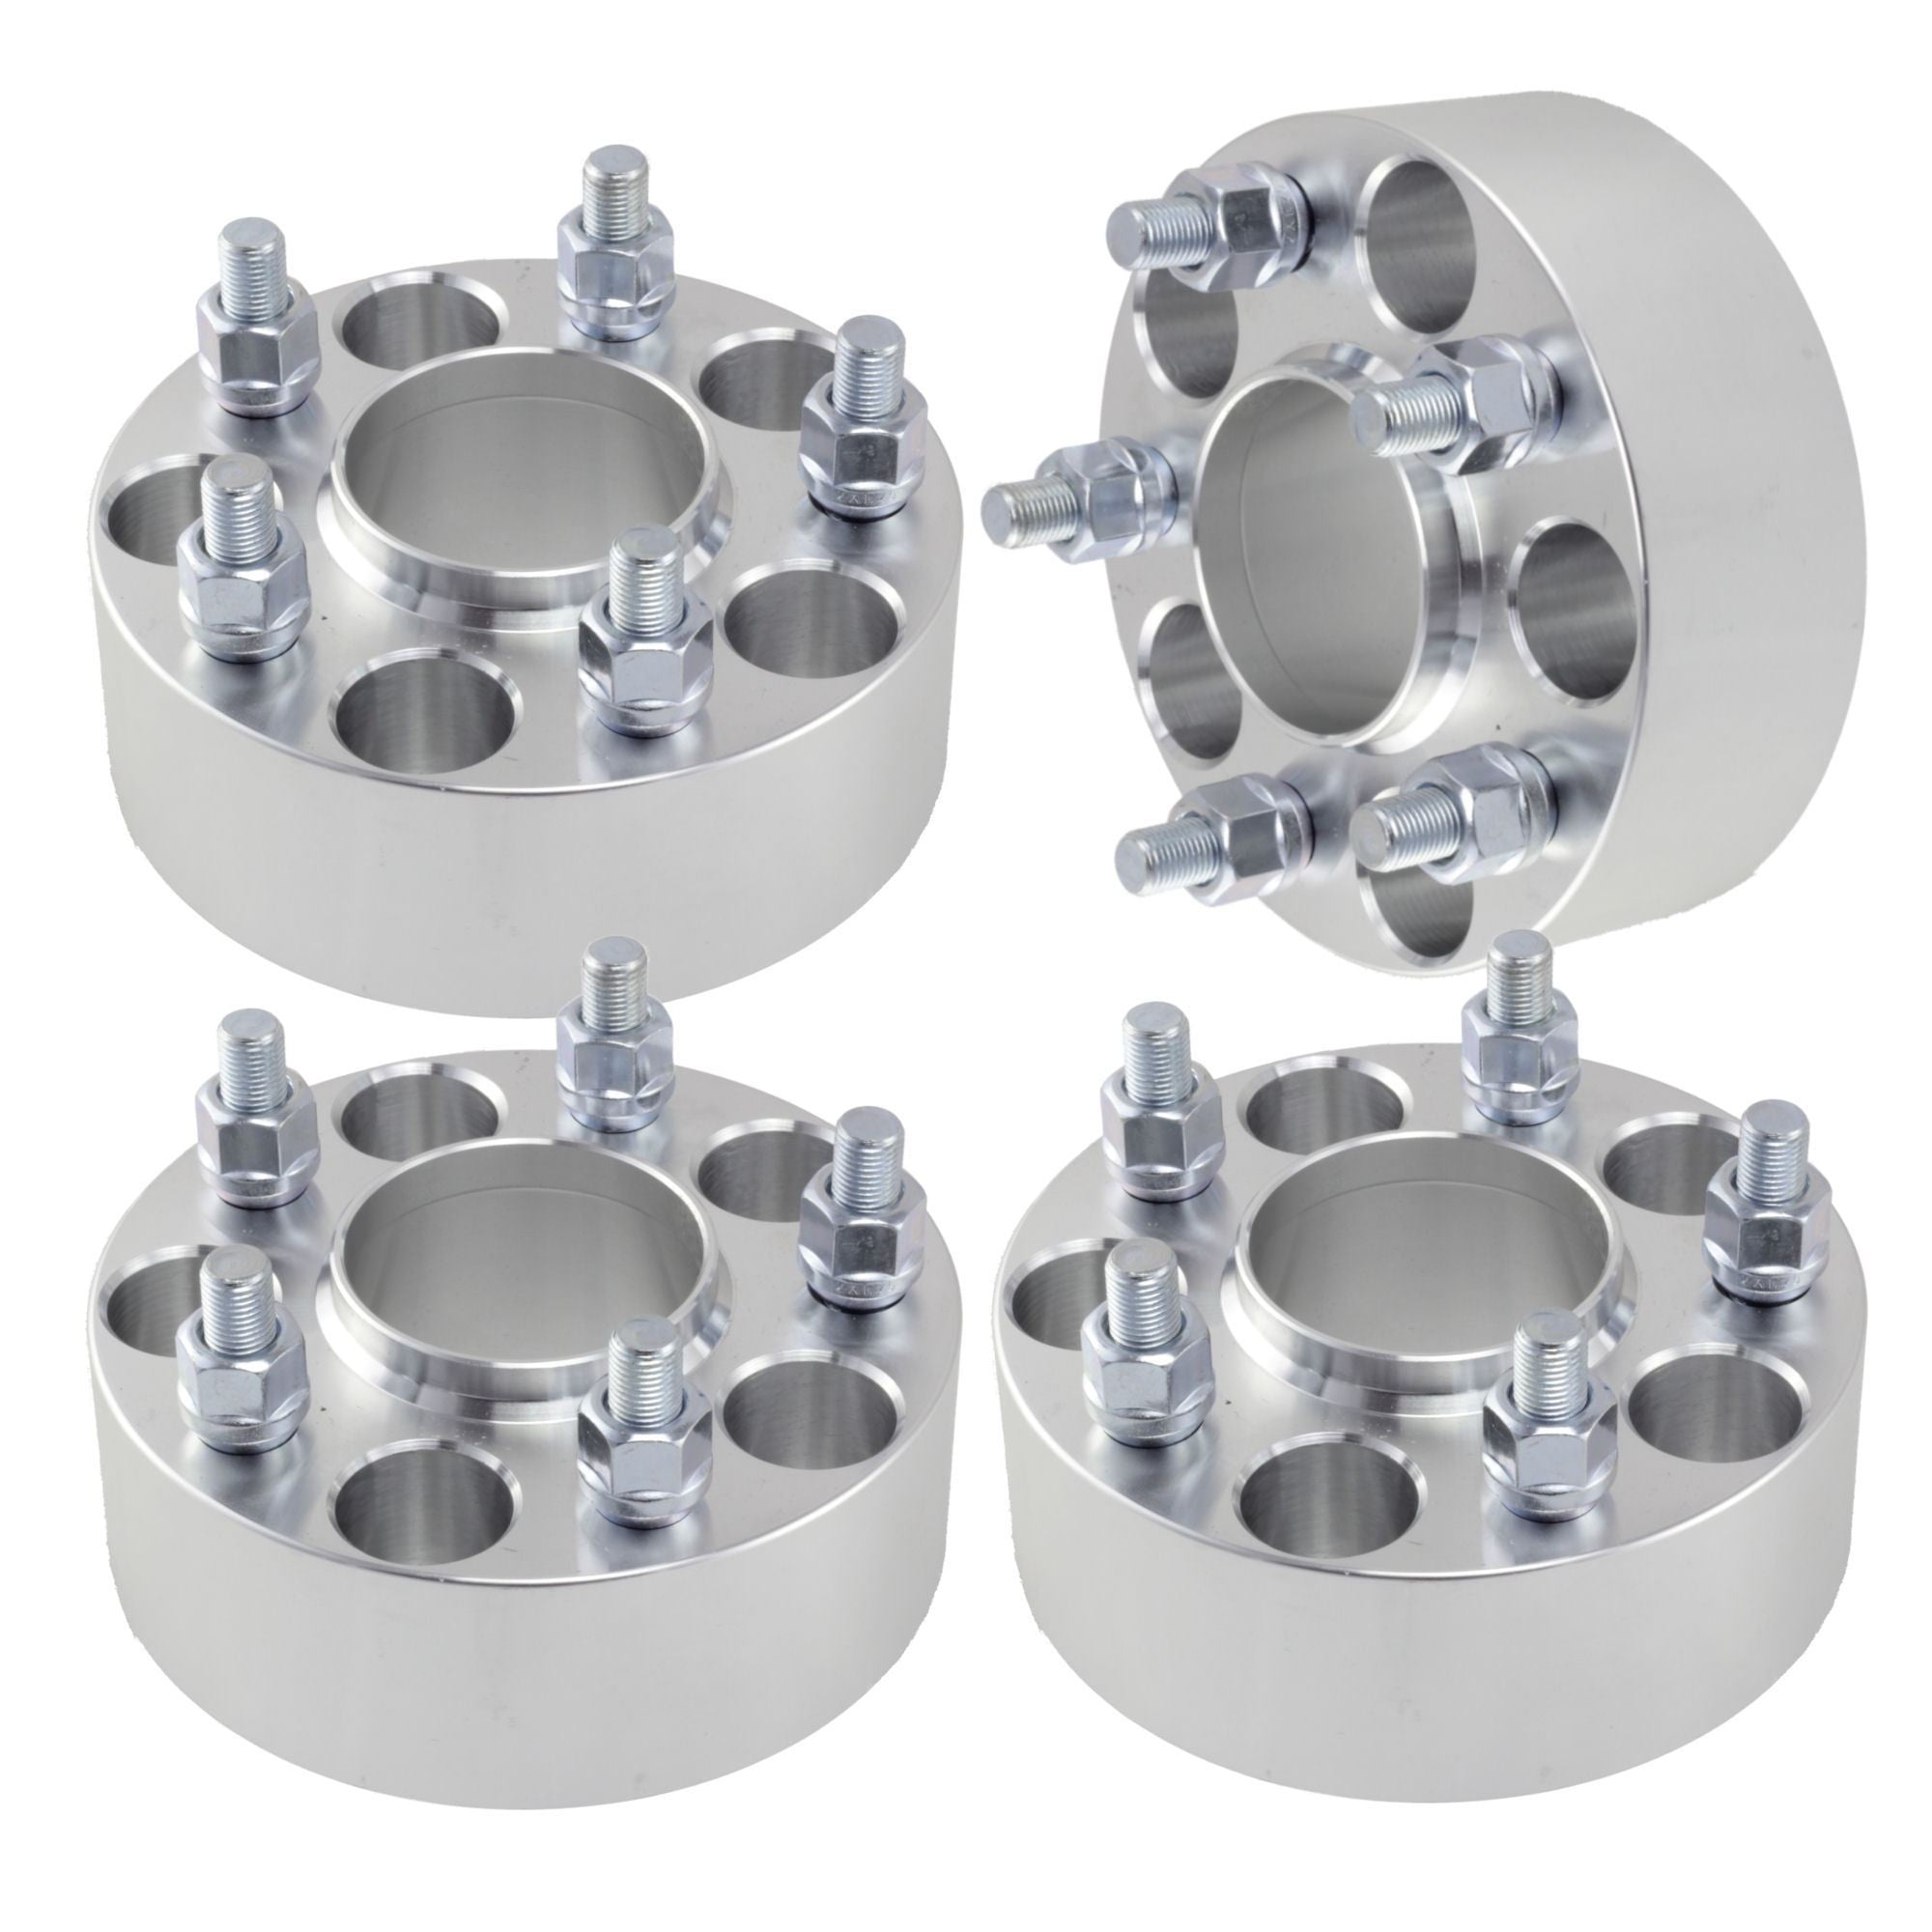 4 x 6mm Hubcentric Wheel spacers fit Nissan Altima Juke 66.1-73.1 5x114.3 